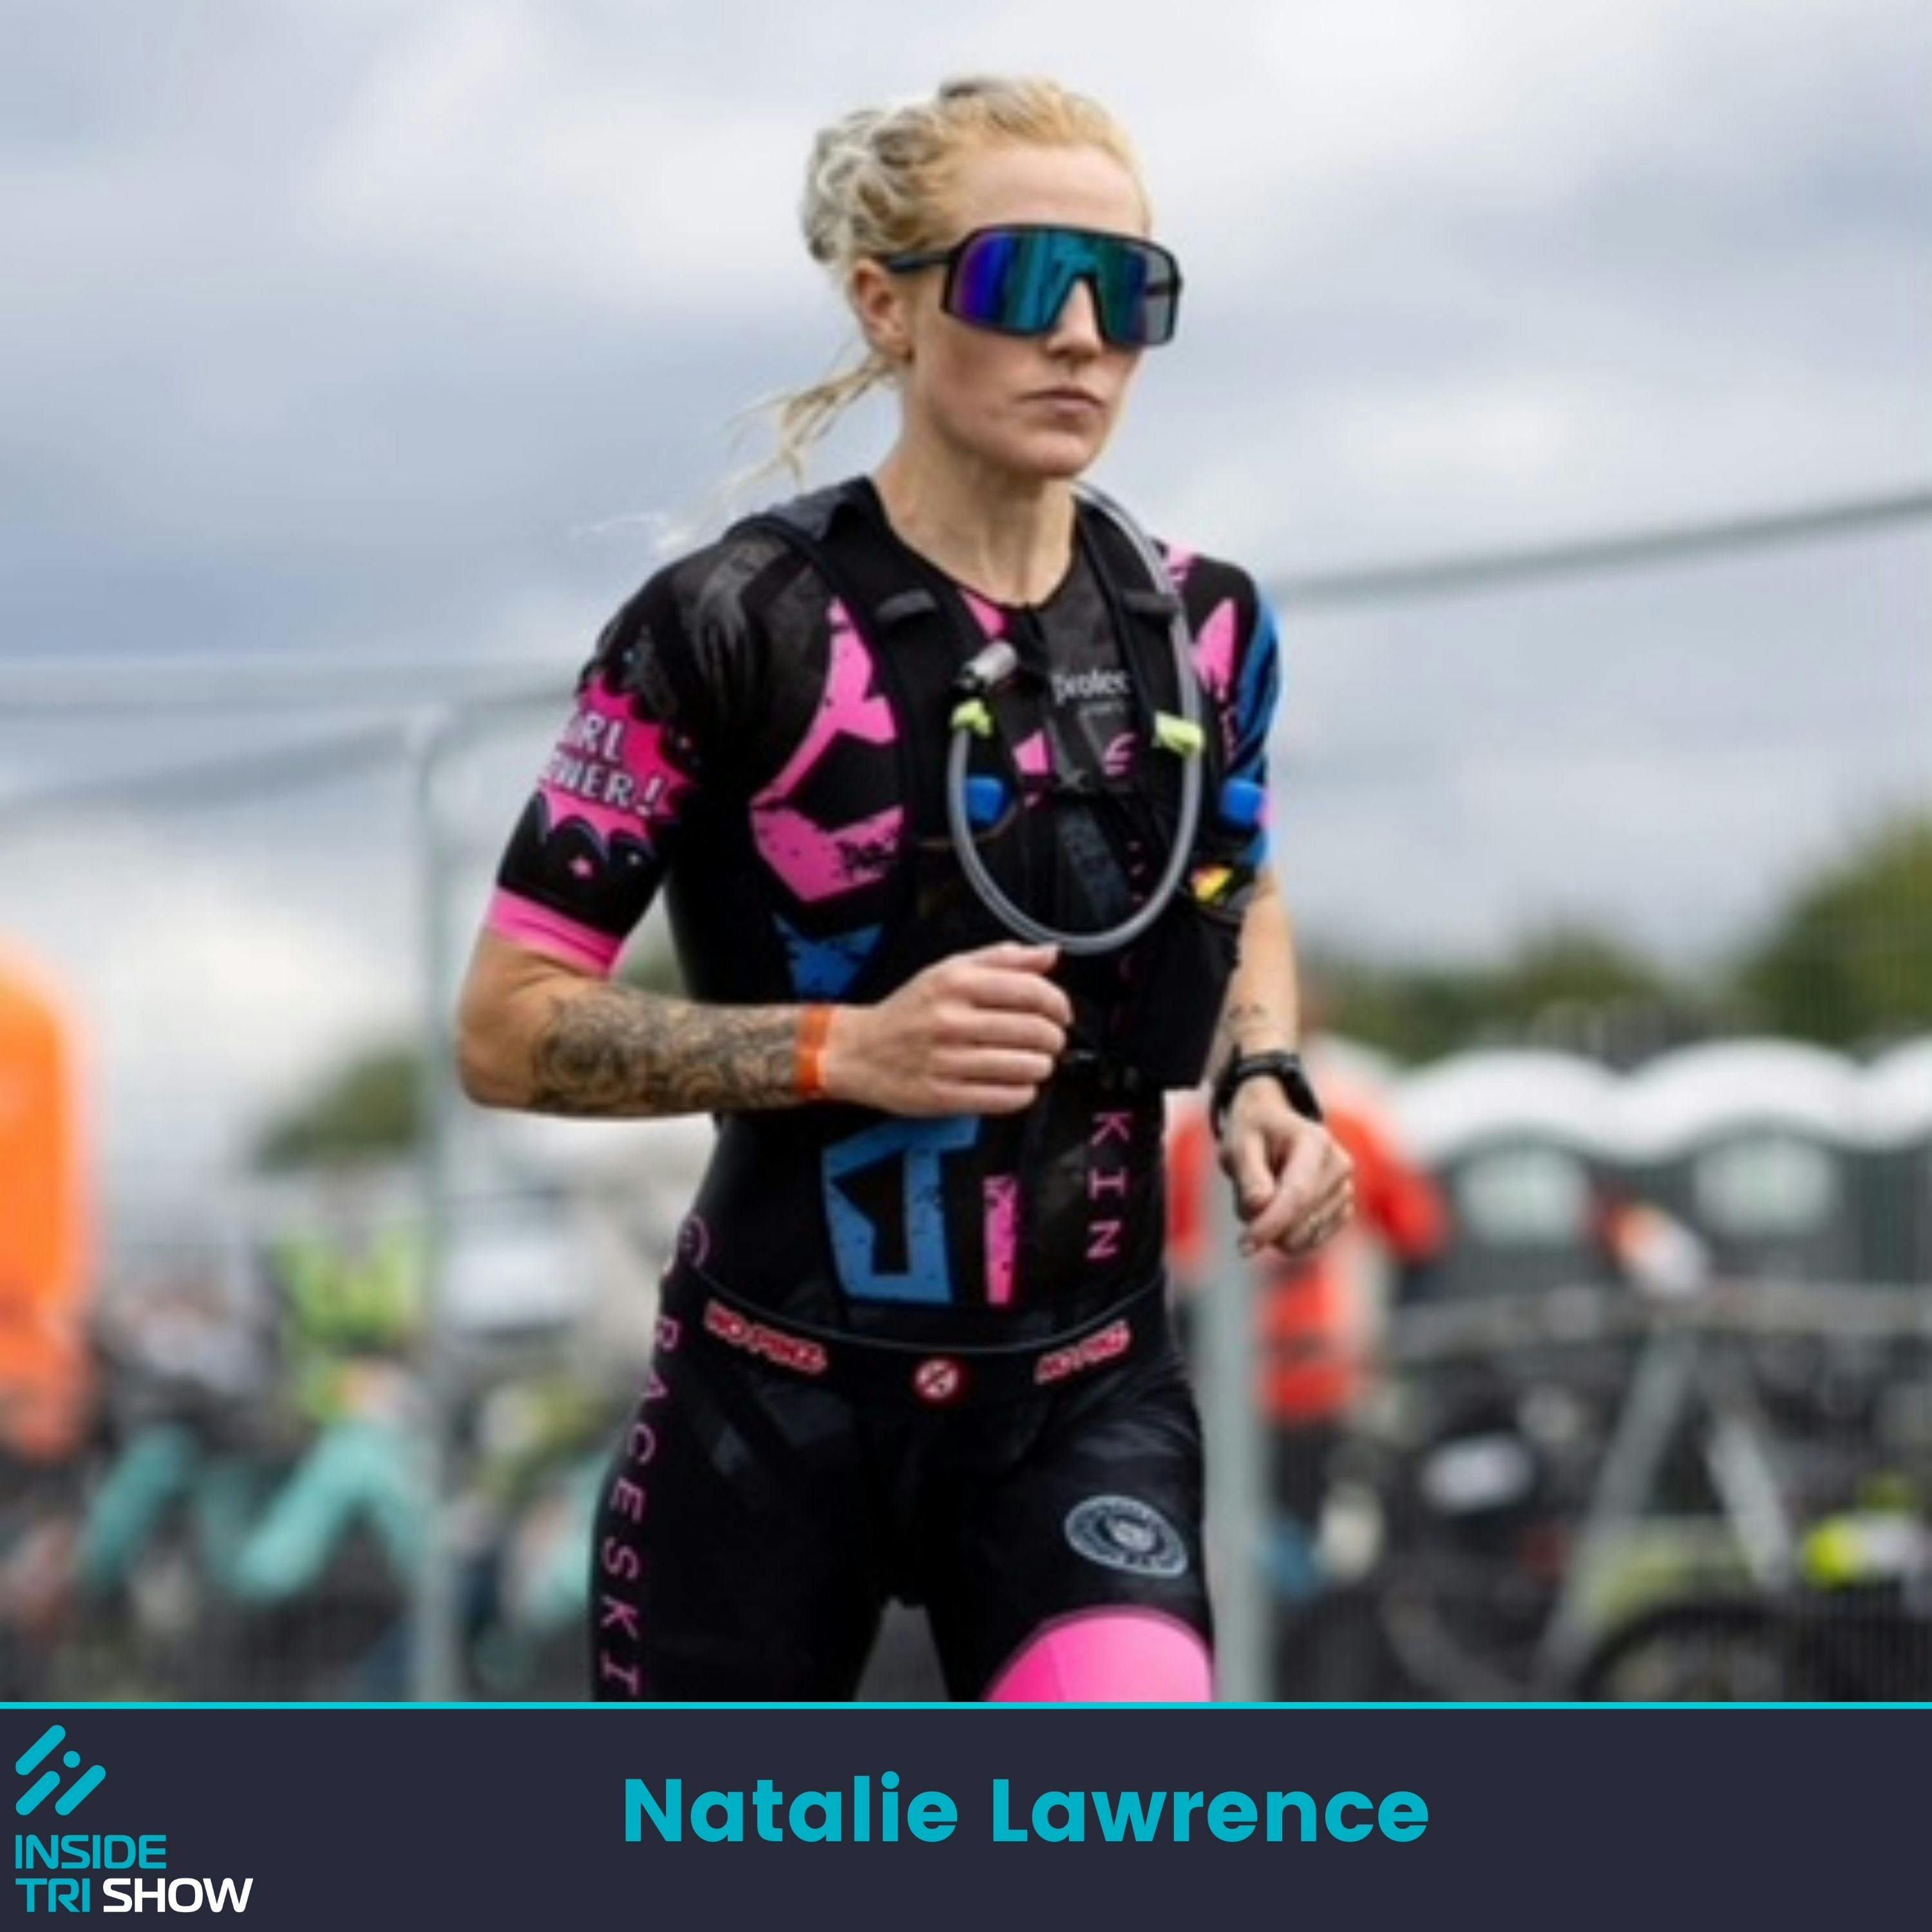 Natalie Lawrence: Pro again at 36